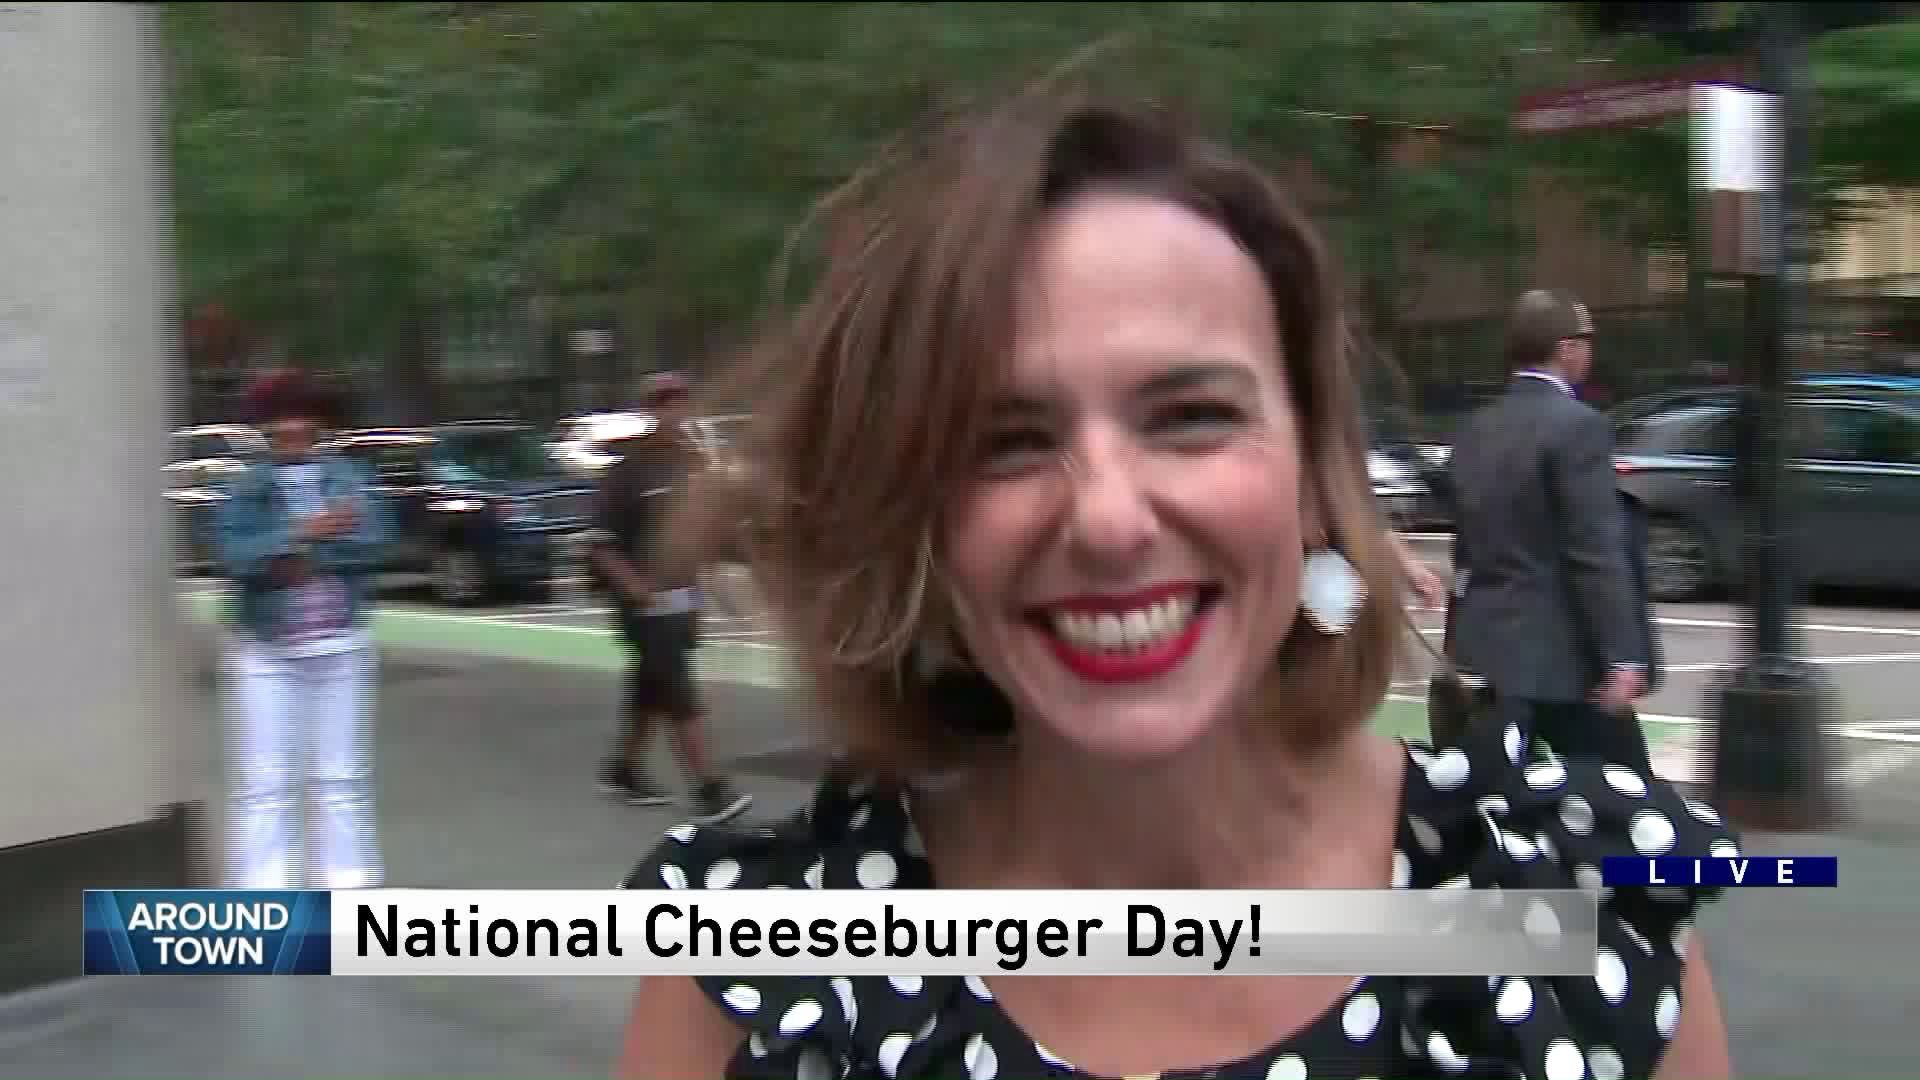 Around Town celebrates National Cheeseburger Day out on the streets